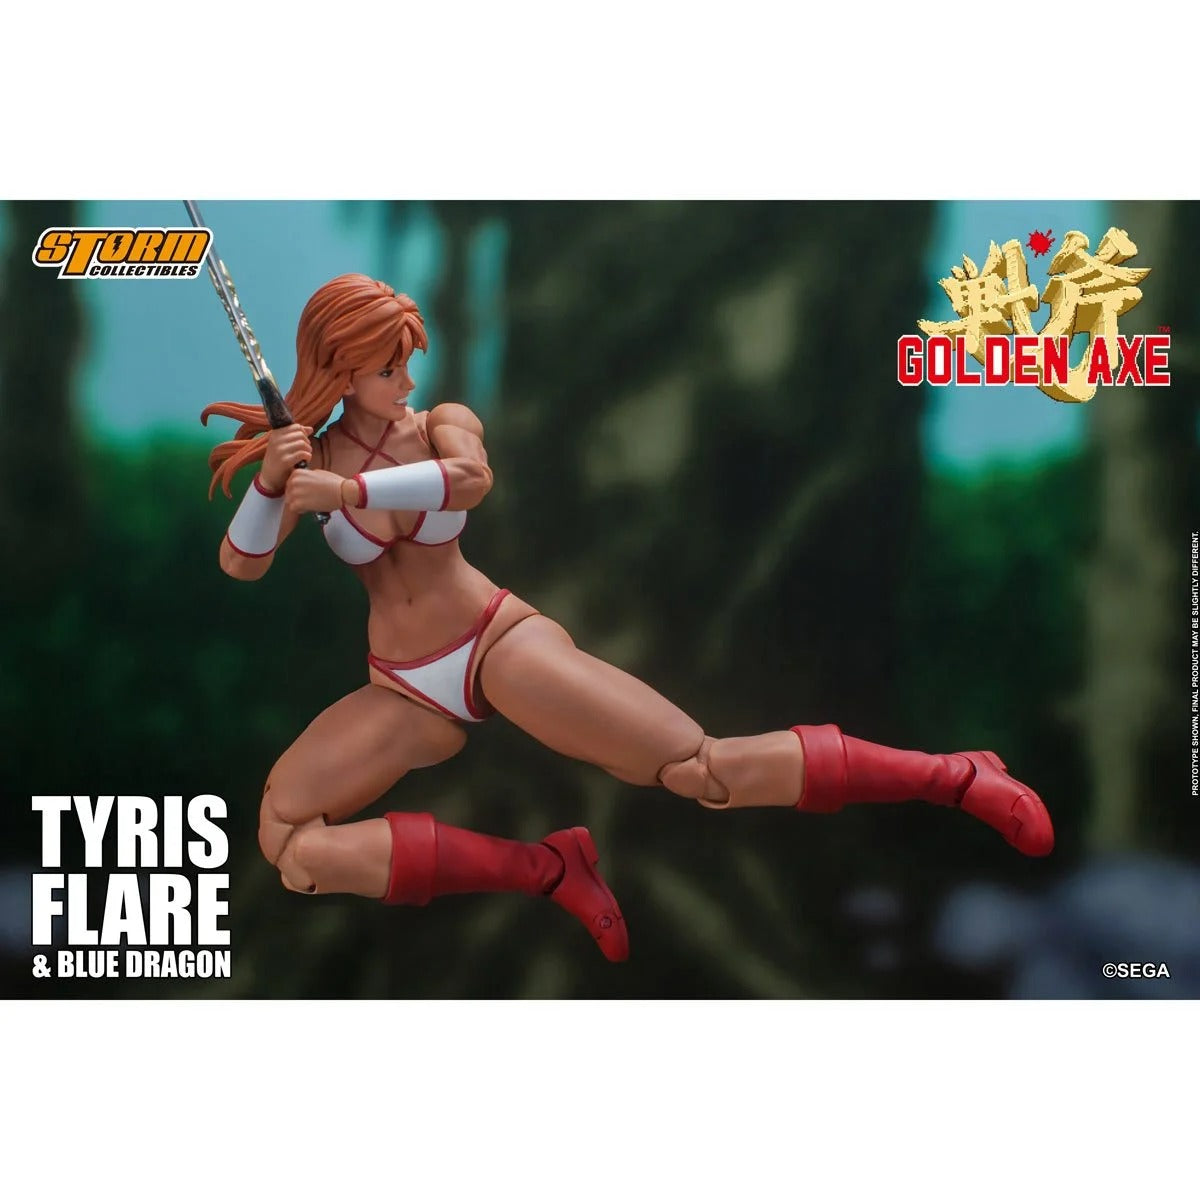 Golden Axe Tyris Flare and Blue Dragon 1:12 Scale Figure